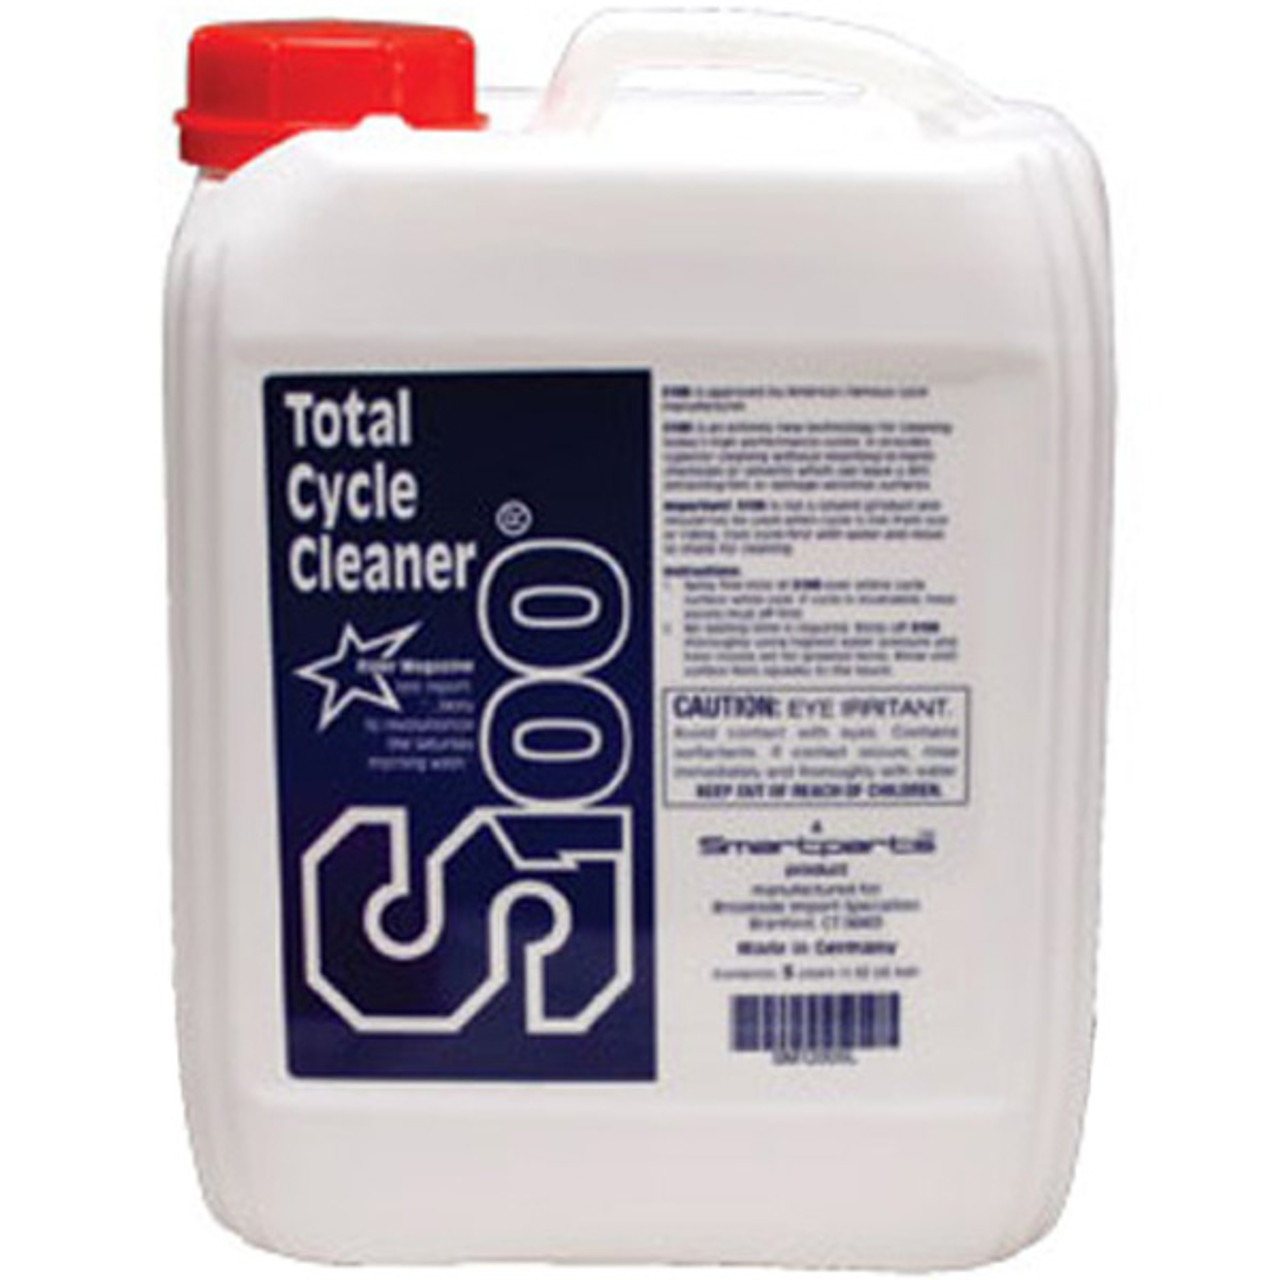 S100 Total Cycle Cleaner 5 Liter